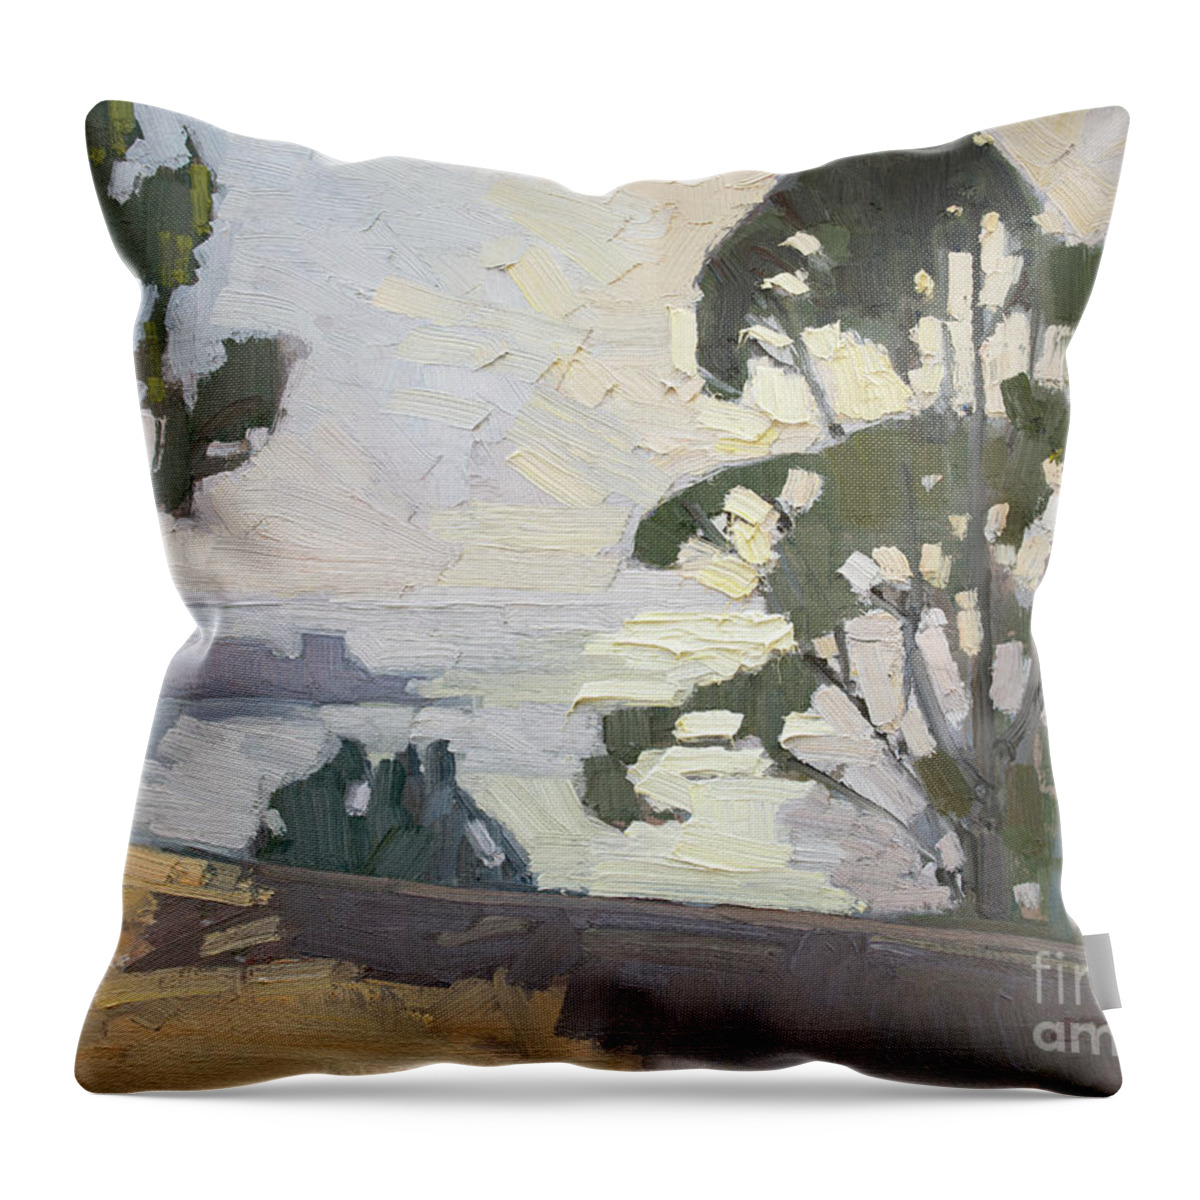 Pacific Ocean Throw Pillow featuring the painting Overlooking the Pacific Ocean - La Jolla, San Diego, California by Paul Strahm